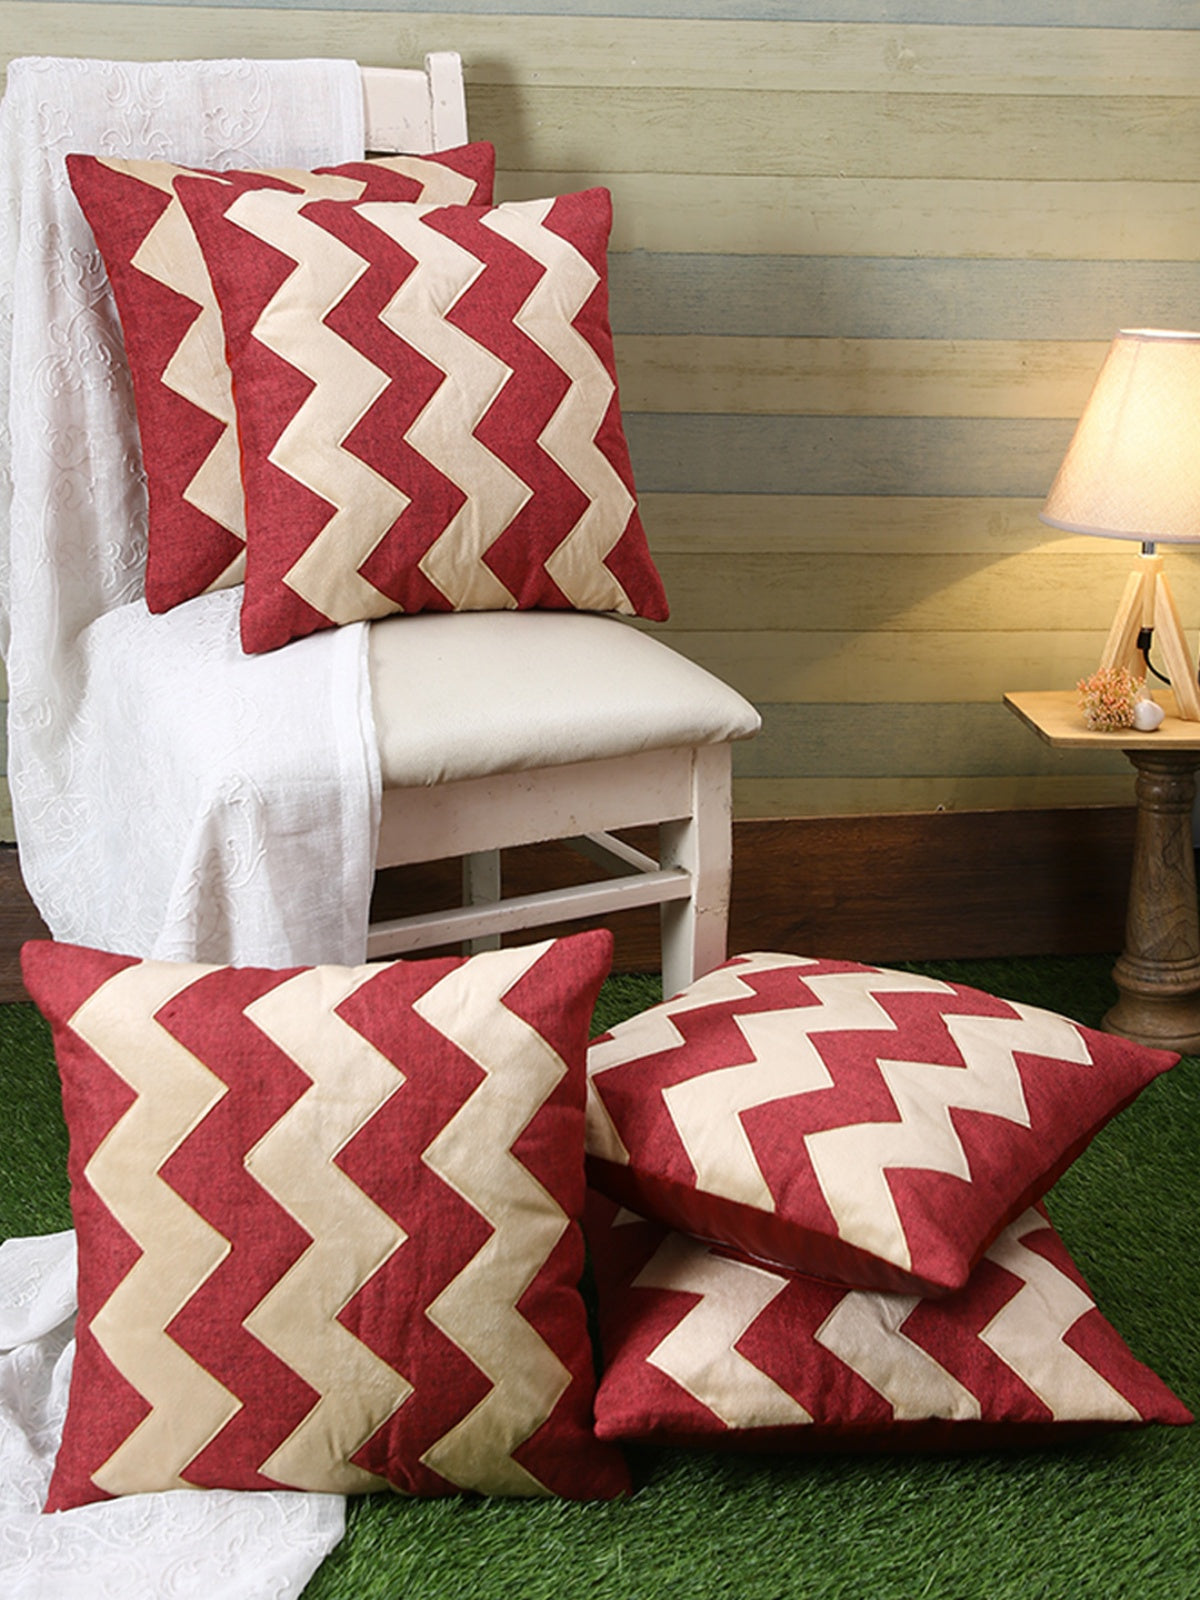 Polyester ZigZag Design Cushion Covers 16x16 Inches, Set of 5 - White & Pink